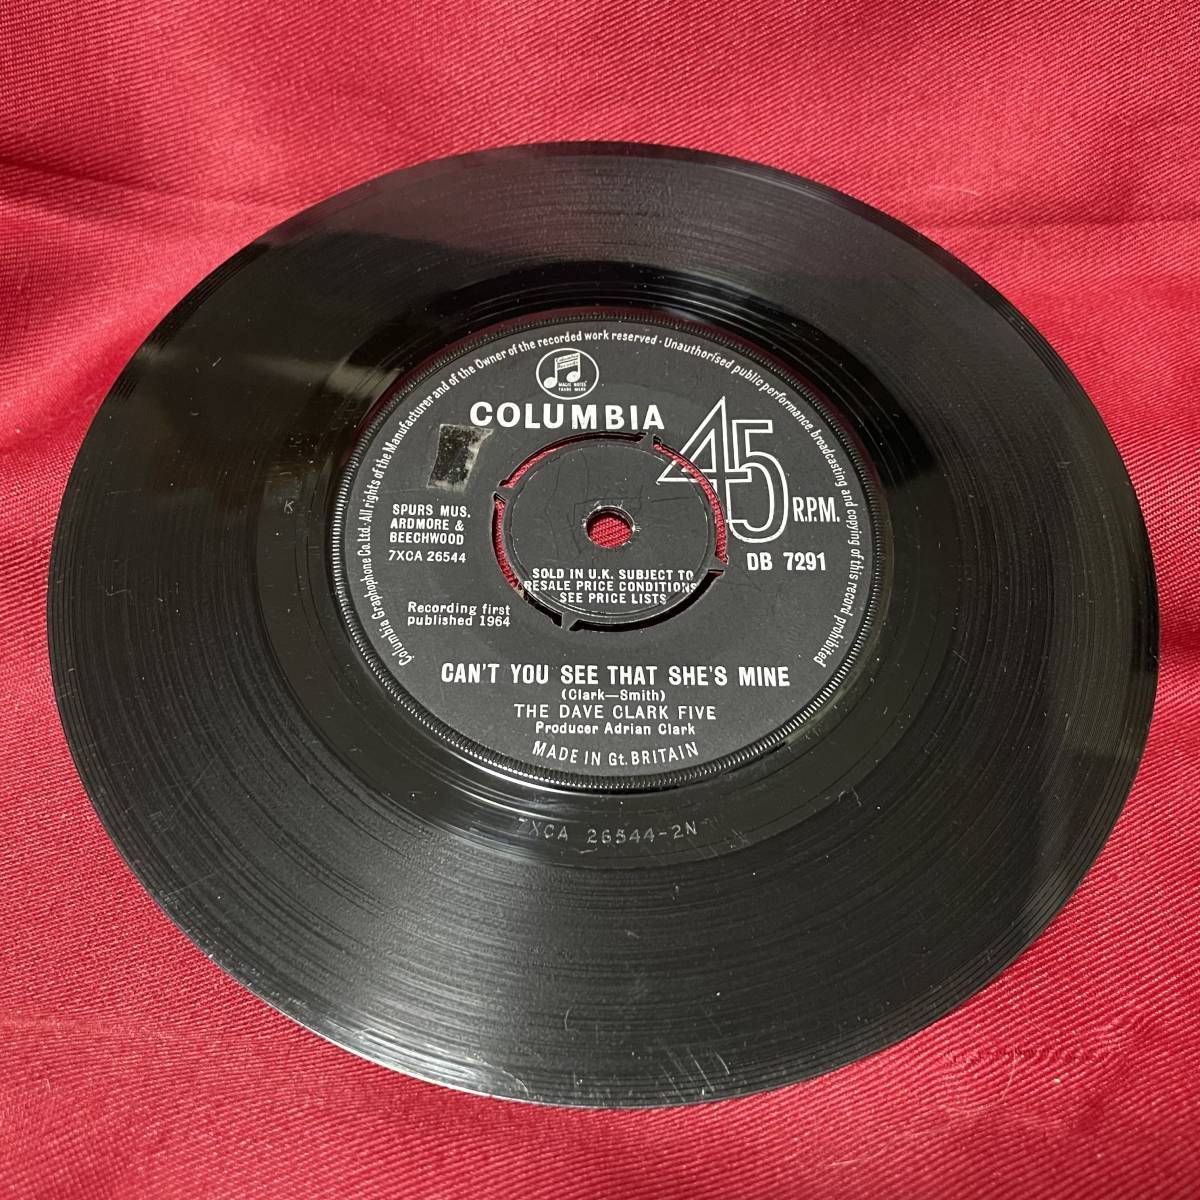 ◆UKorg7”s◆THE DAVE CLARK FIVE◆CAN'T YOU SEE THAT SHE'S MINE/BECAUSE◆_画像5